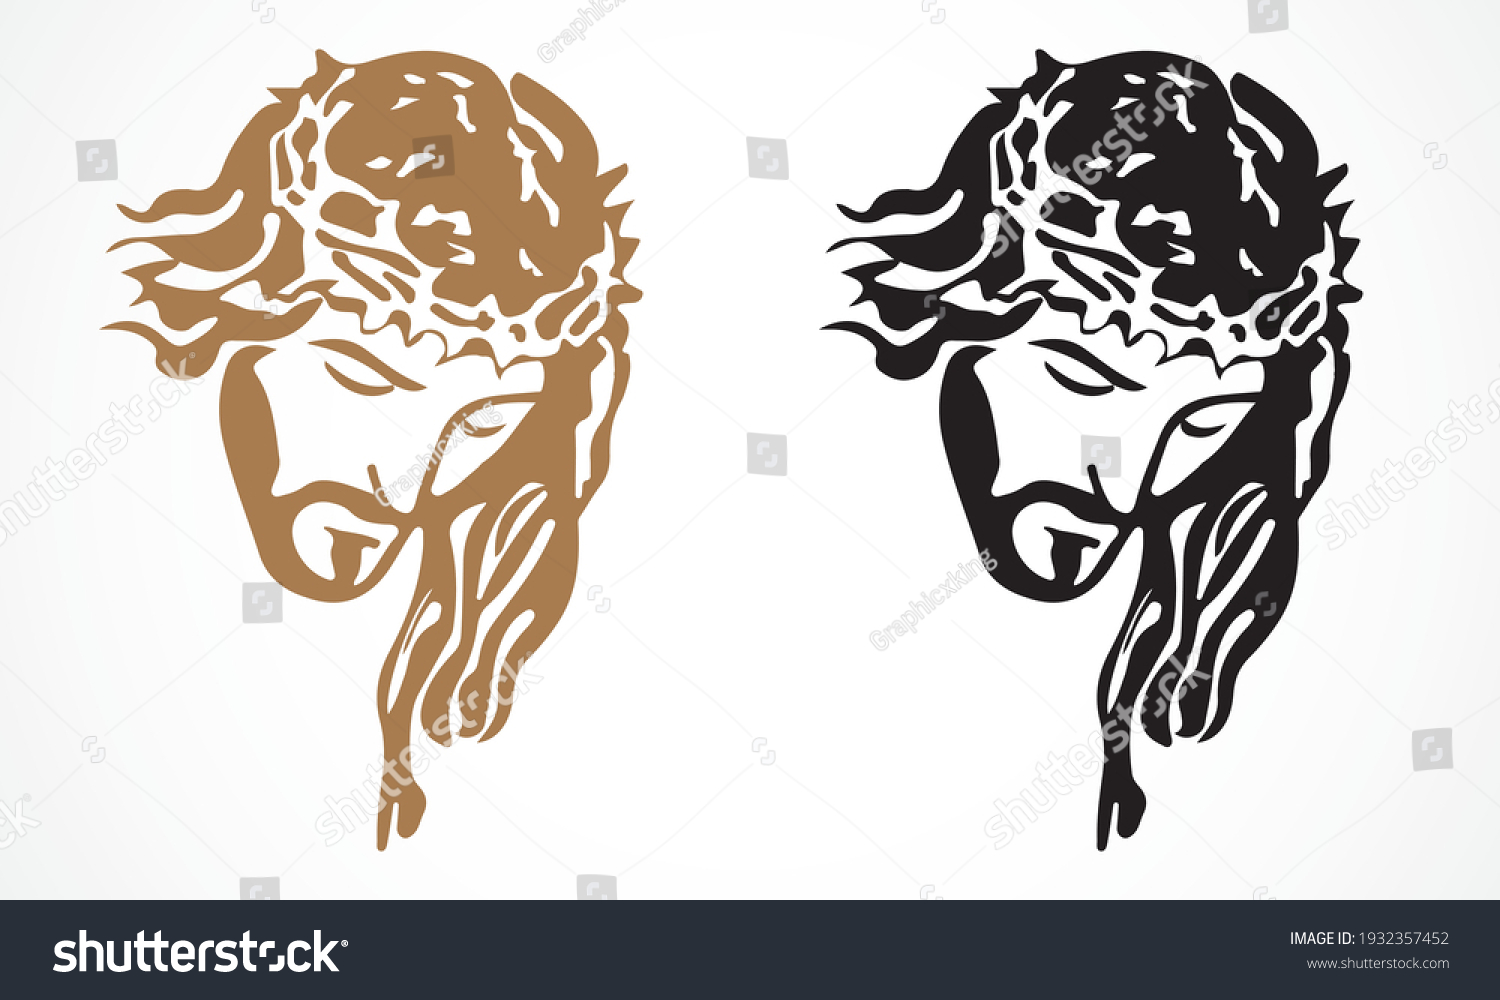 Jesus Thorns Decal Vector File Editable Stock Vector (Royalty Free ...